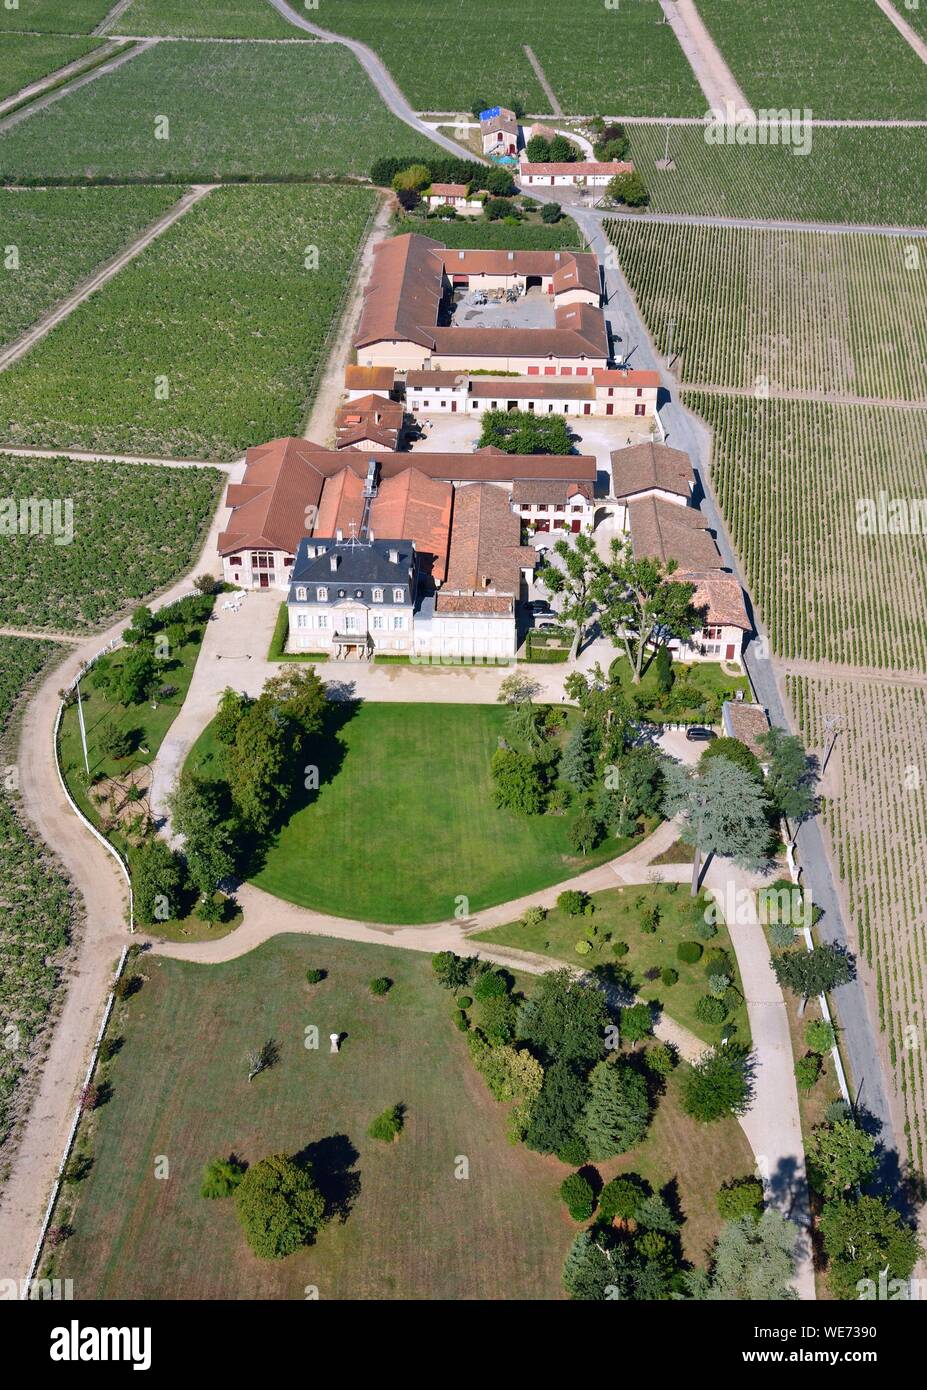 France, Gironde, Pauillac, Chateau Pontet Canet vineyard (aerial view) Stock Photo